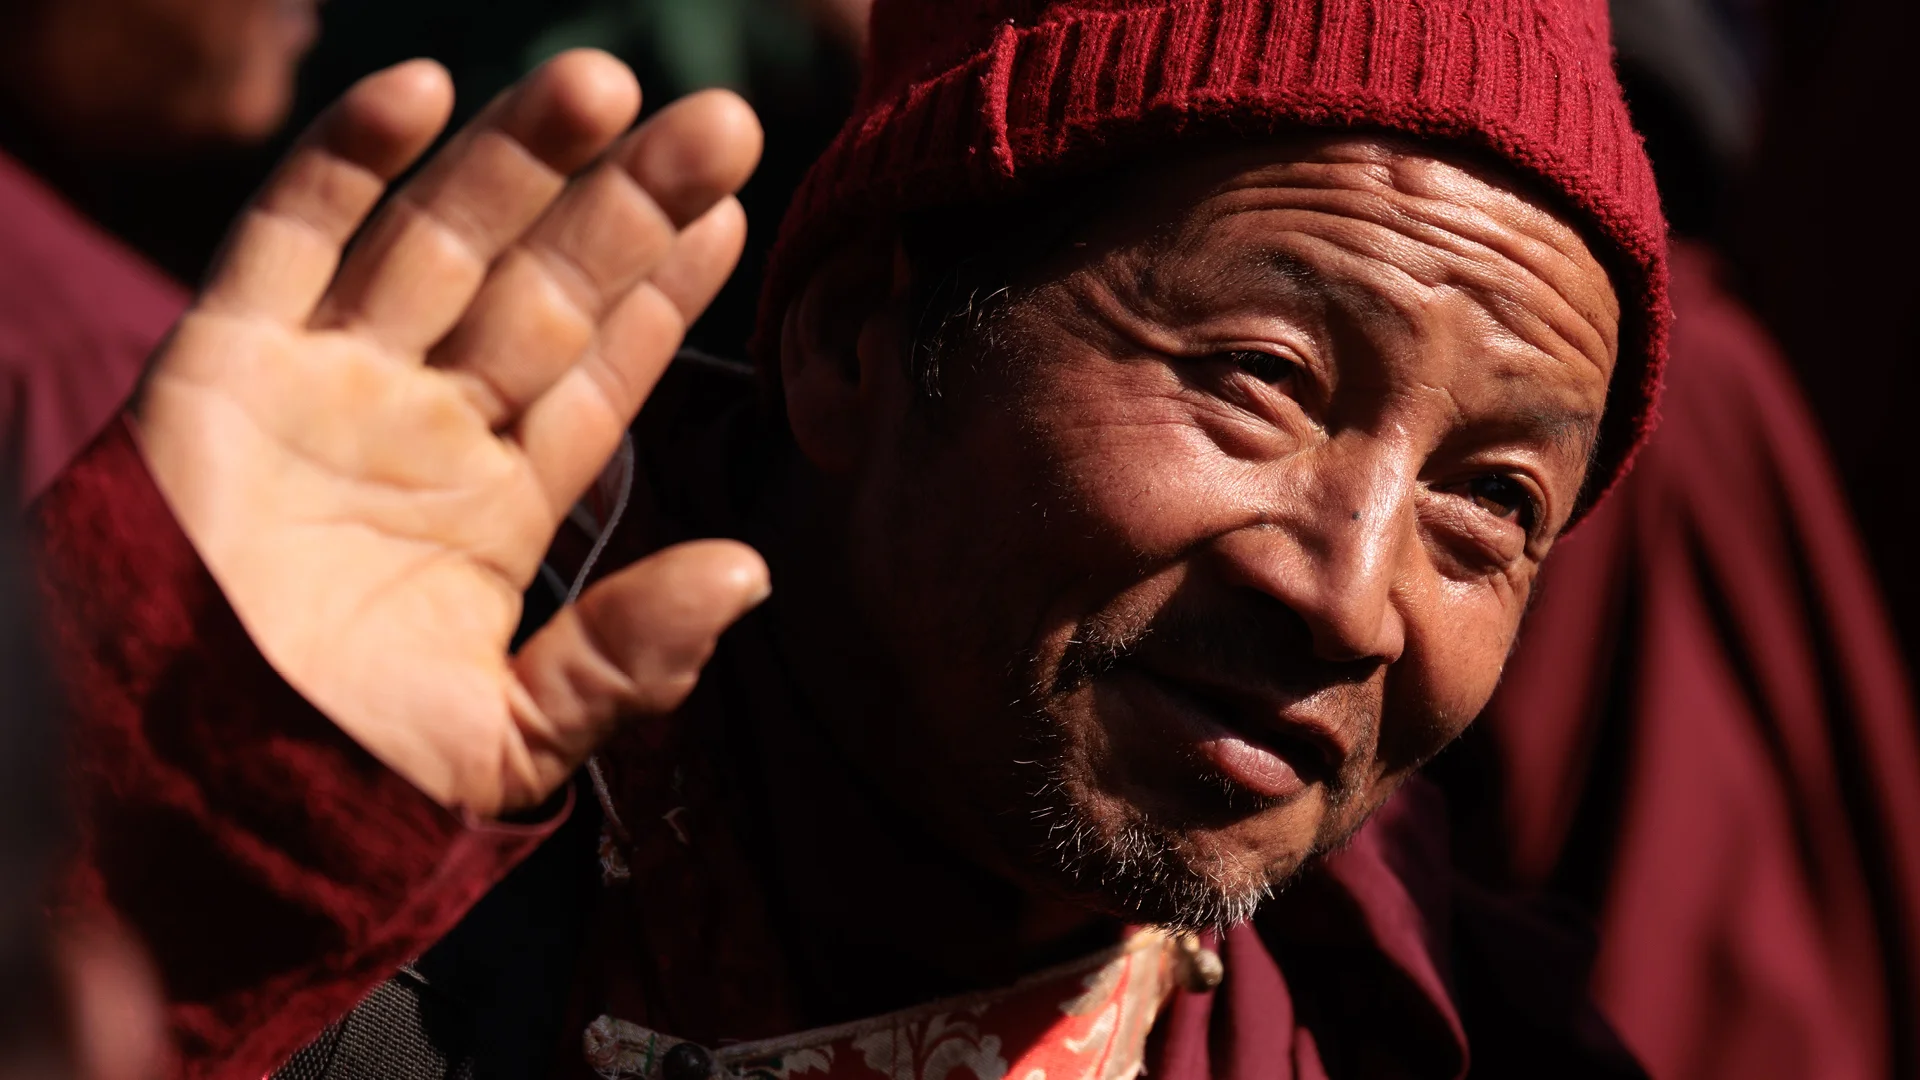 Tibetan lama during a ceremony in the village of Gagal